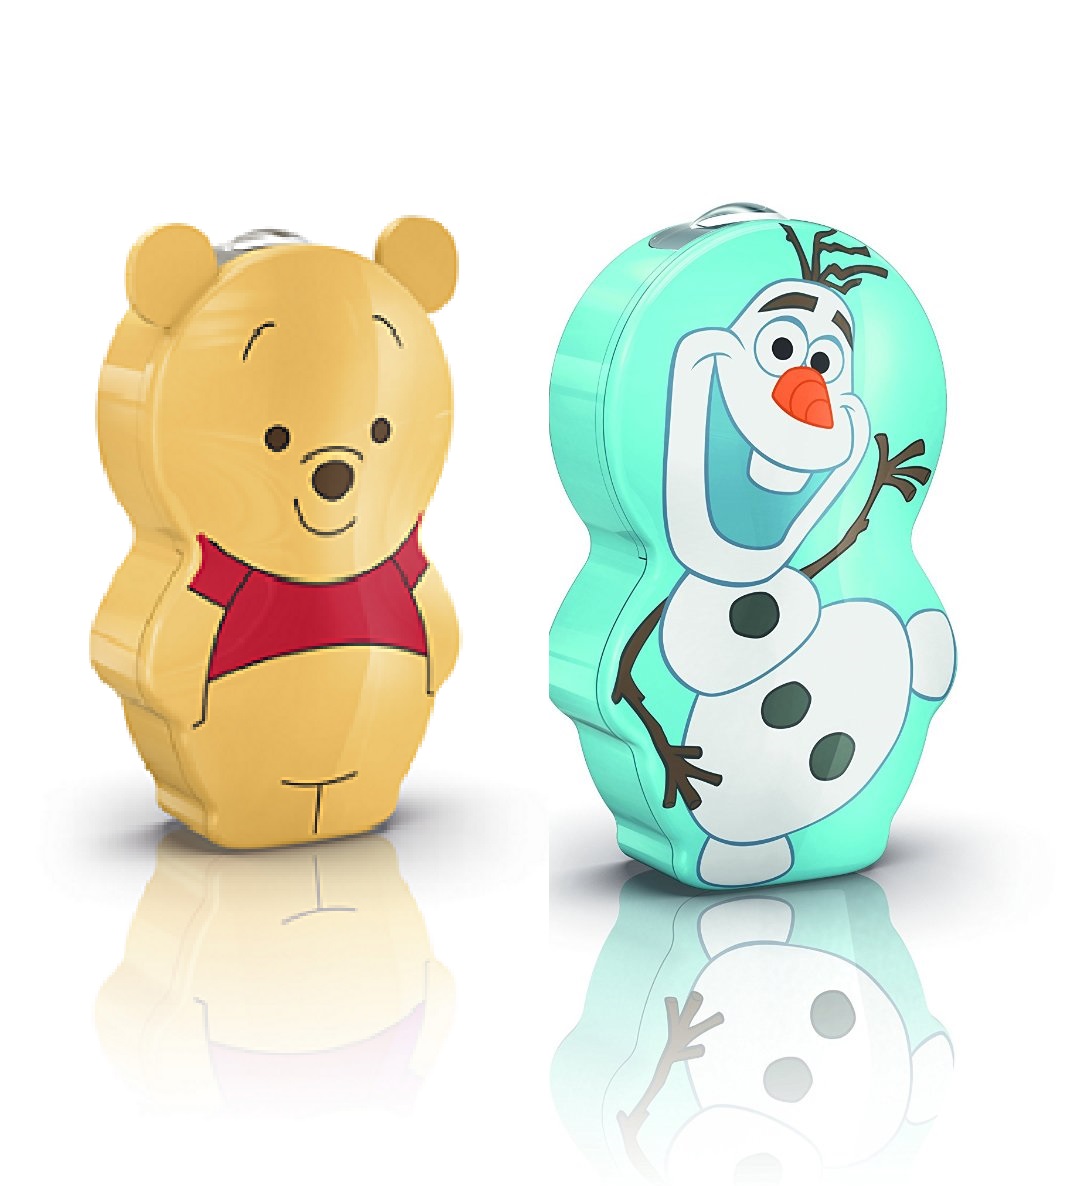 Simply Life Philips Winnie the Pooh Torch & Frozen Torch